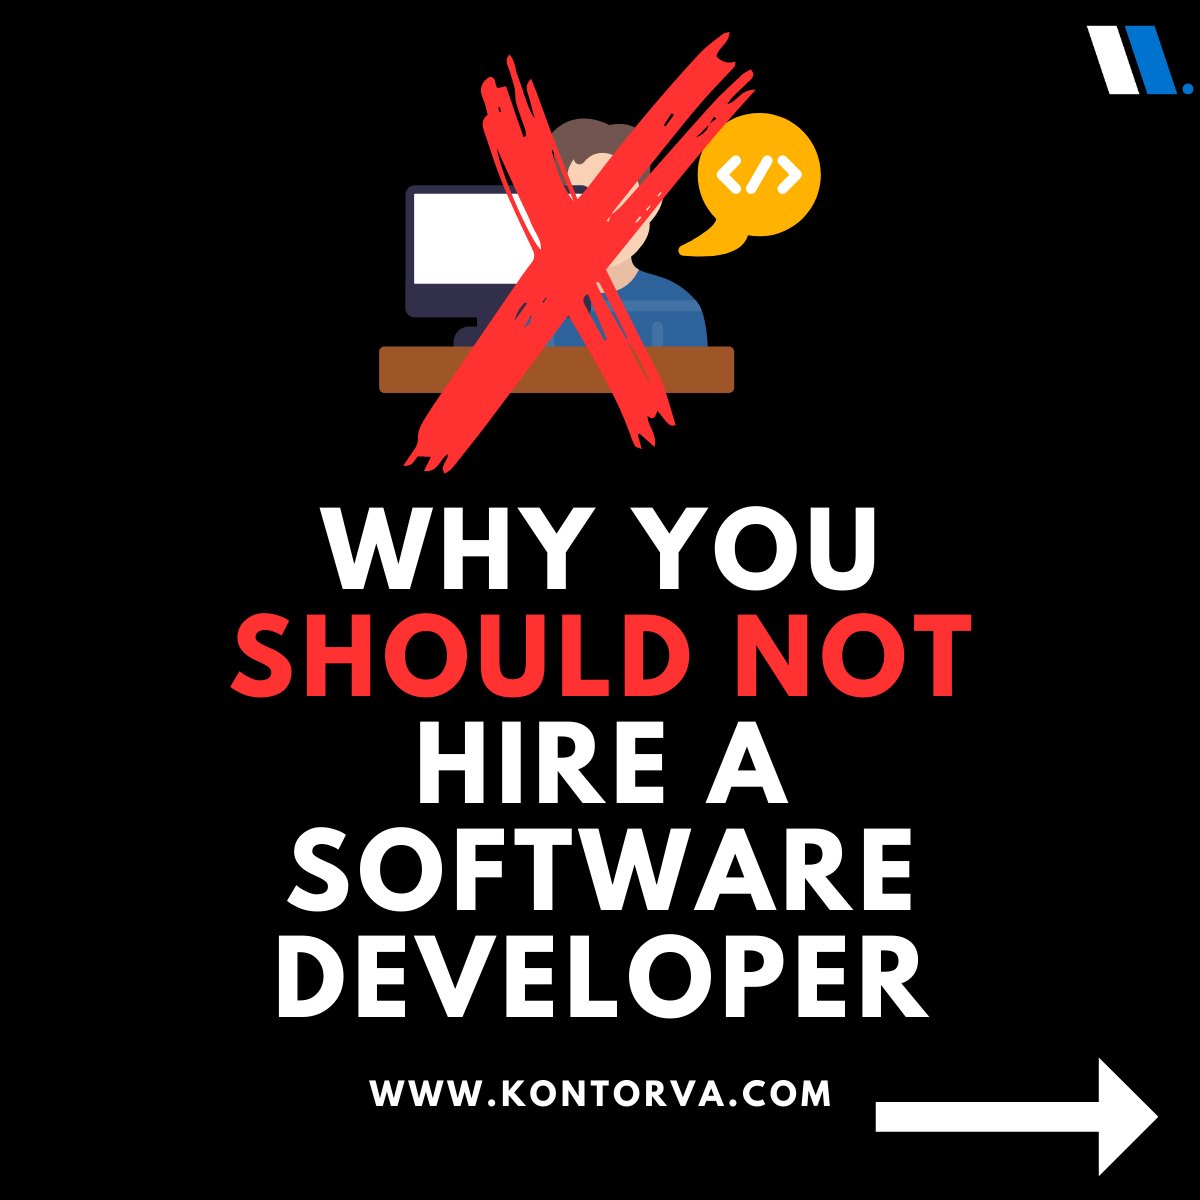 Deciding between Software Development as a Service (SDaaS) and full-time tech hiring? Let's explore why the former might be a better choice. #SoftwareDevelopmentAsAService #SDaaS
#TechHiring #hiring #HIRINGNOW